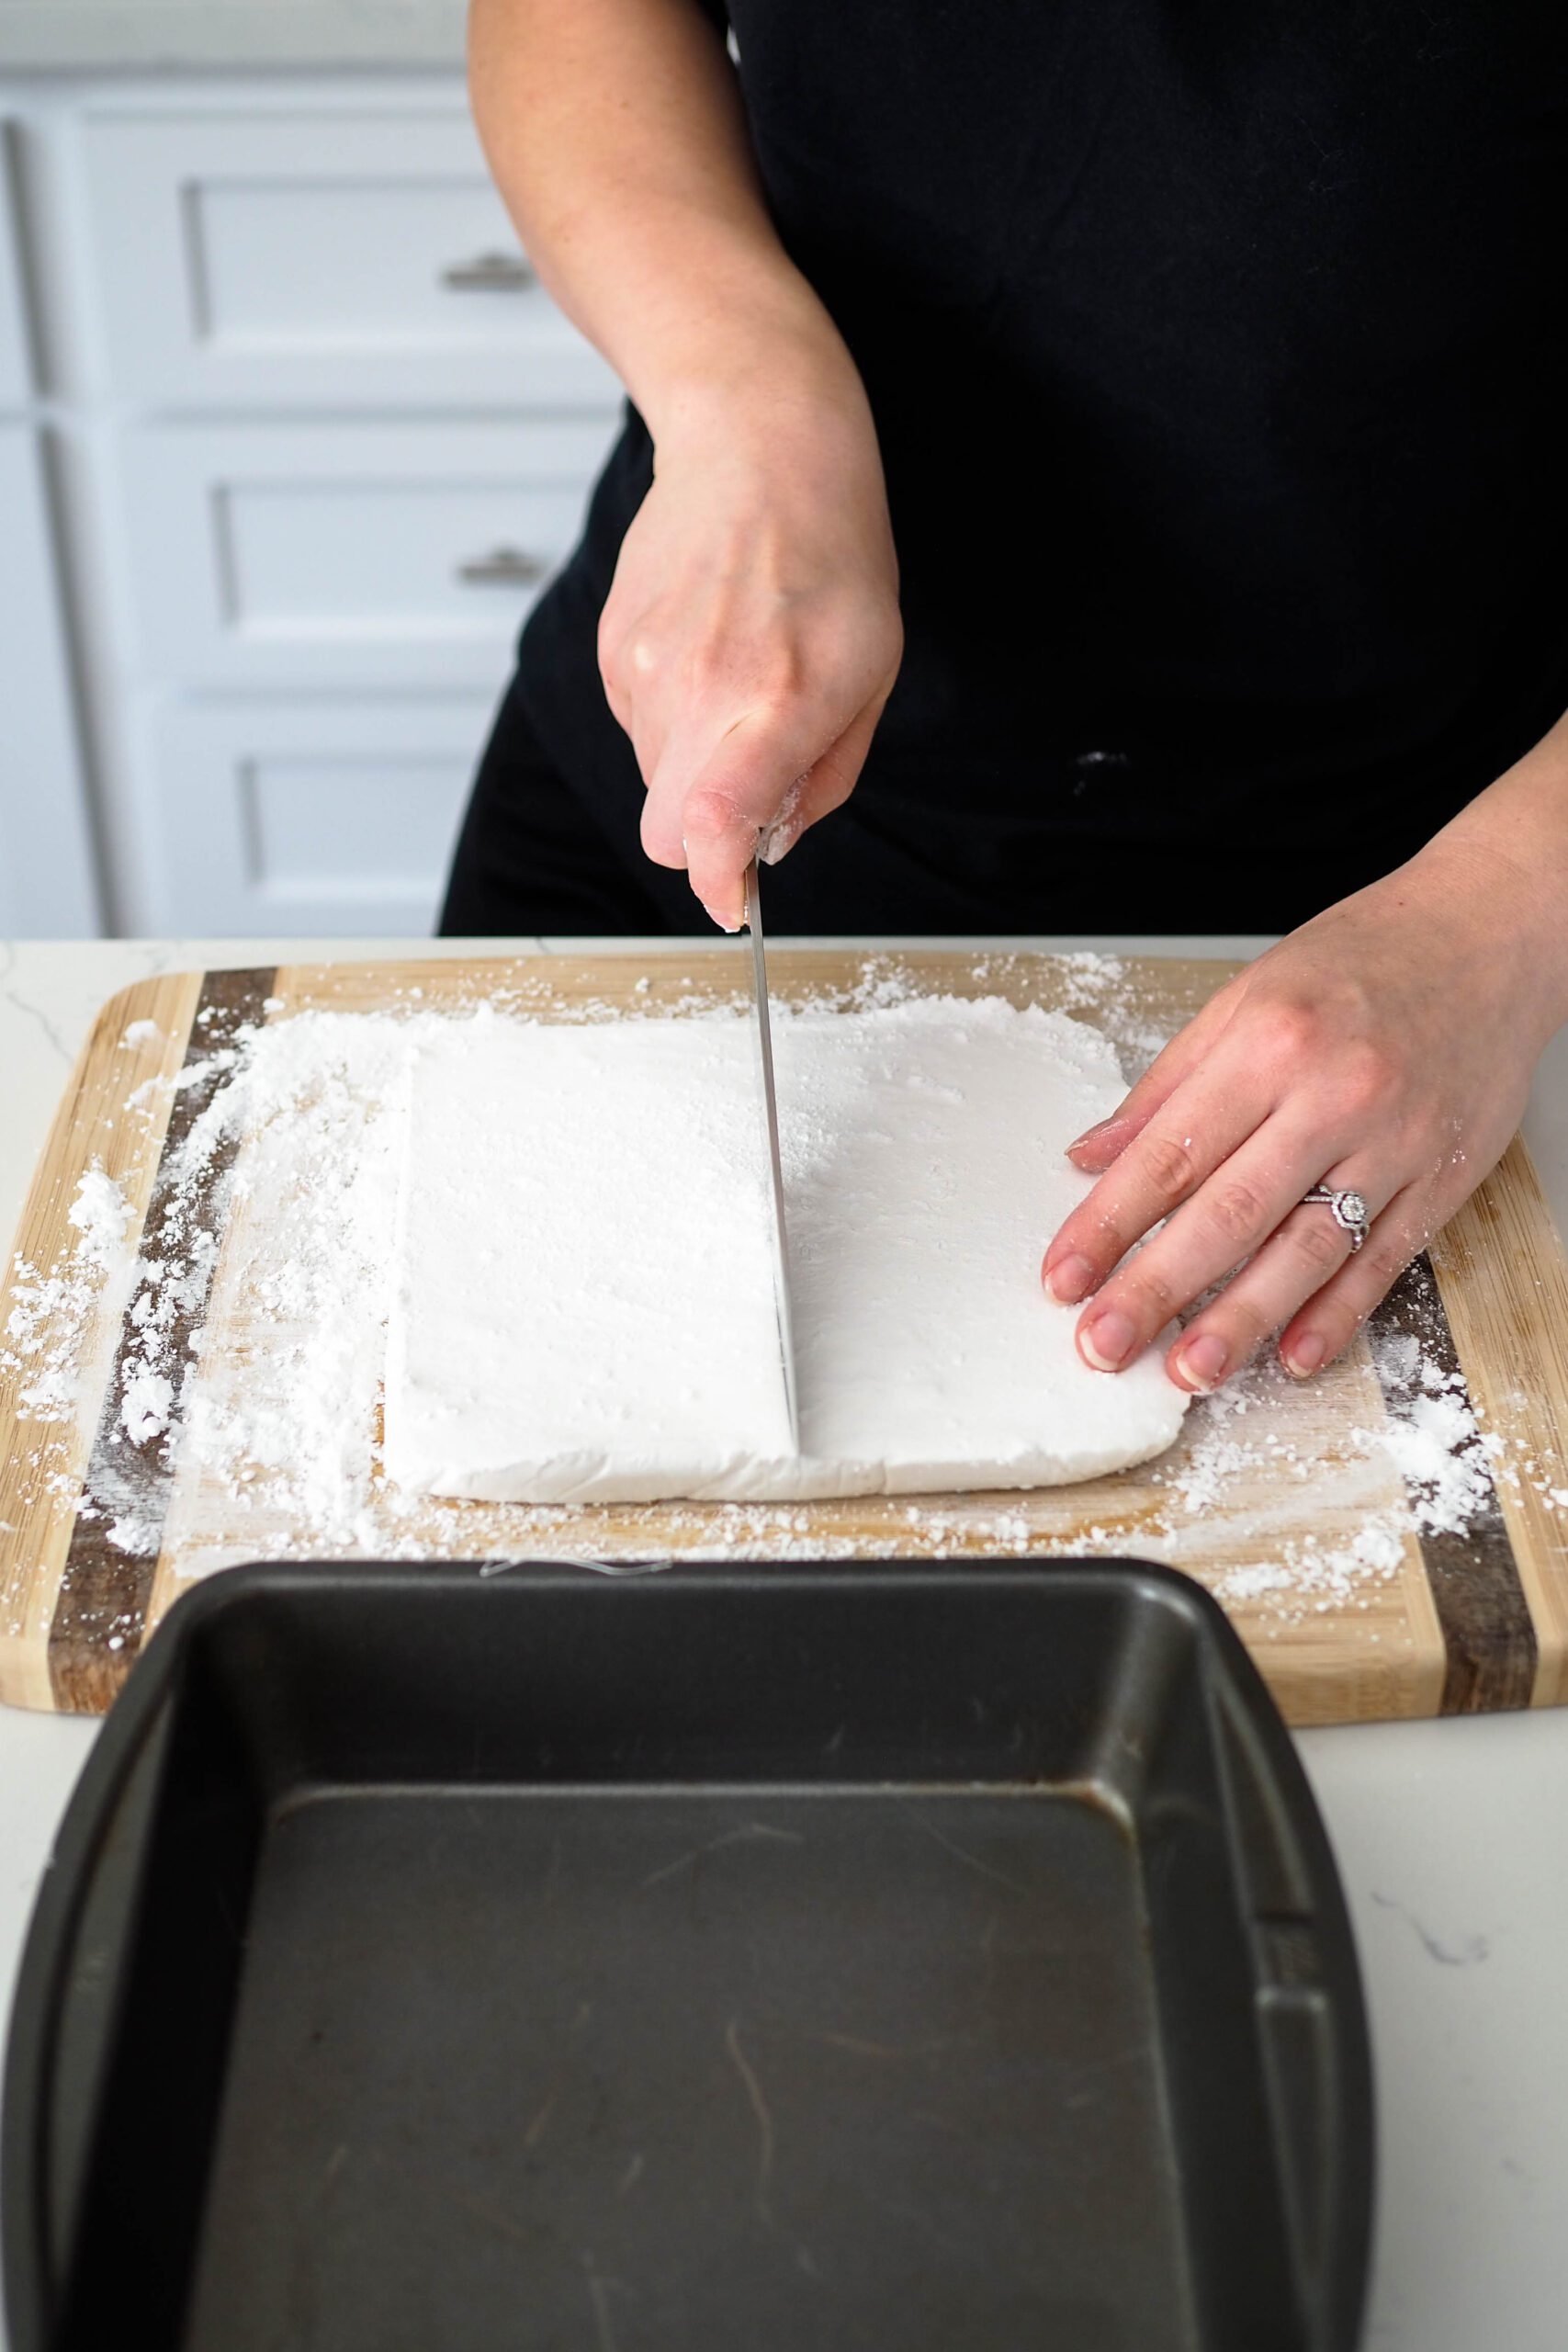 A homemade marshmallow loaf is cut in half with a sharp knife.